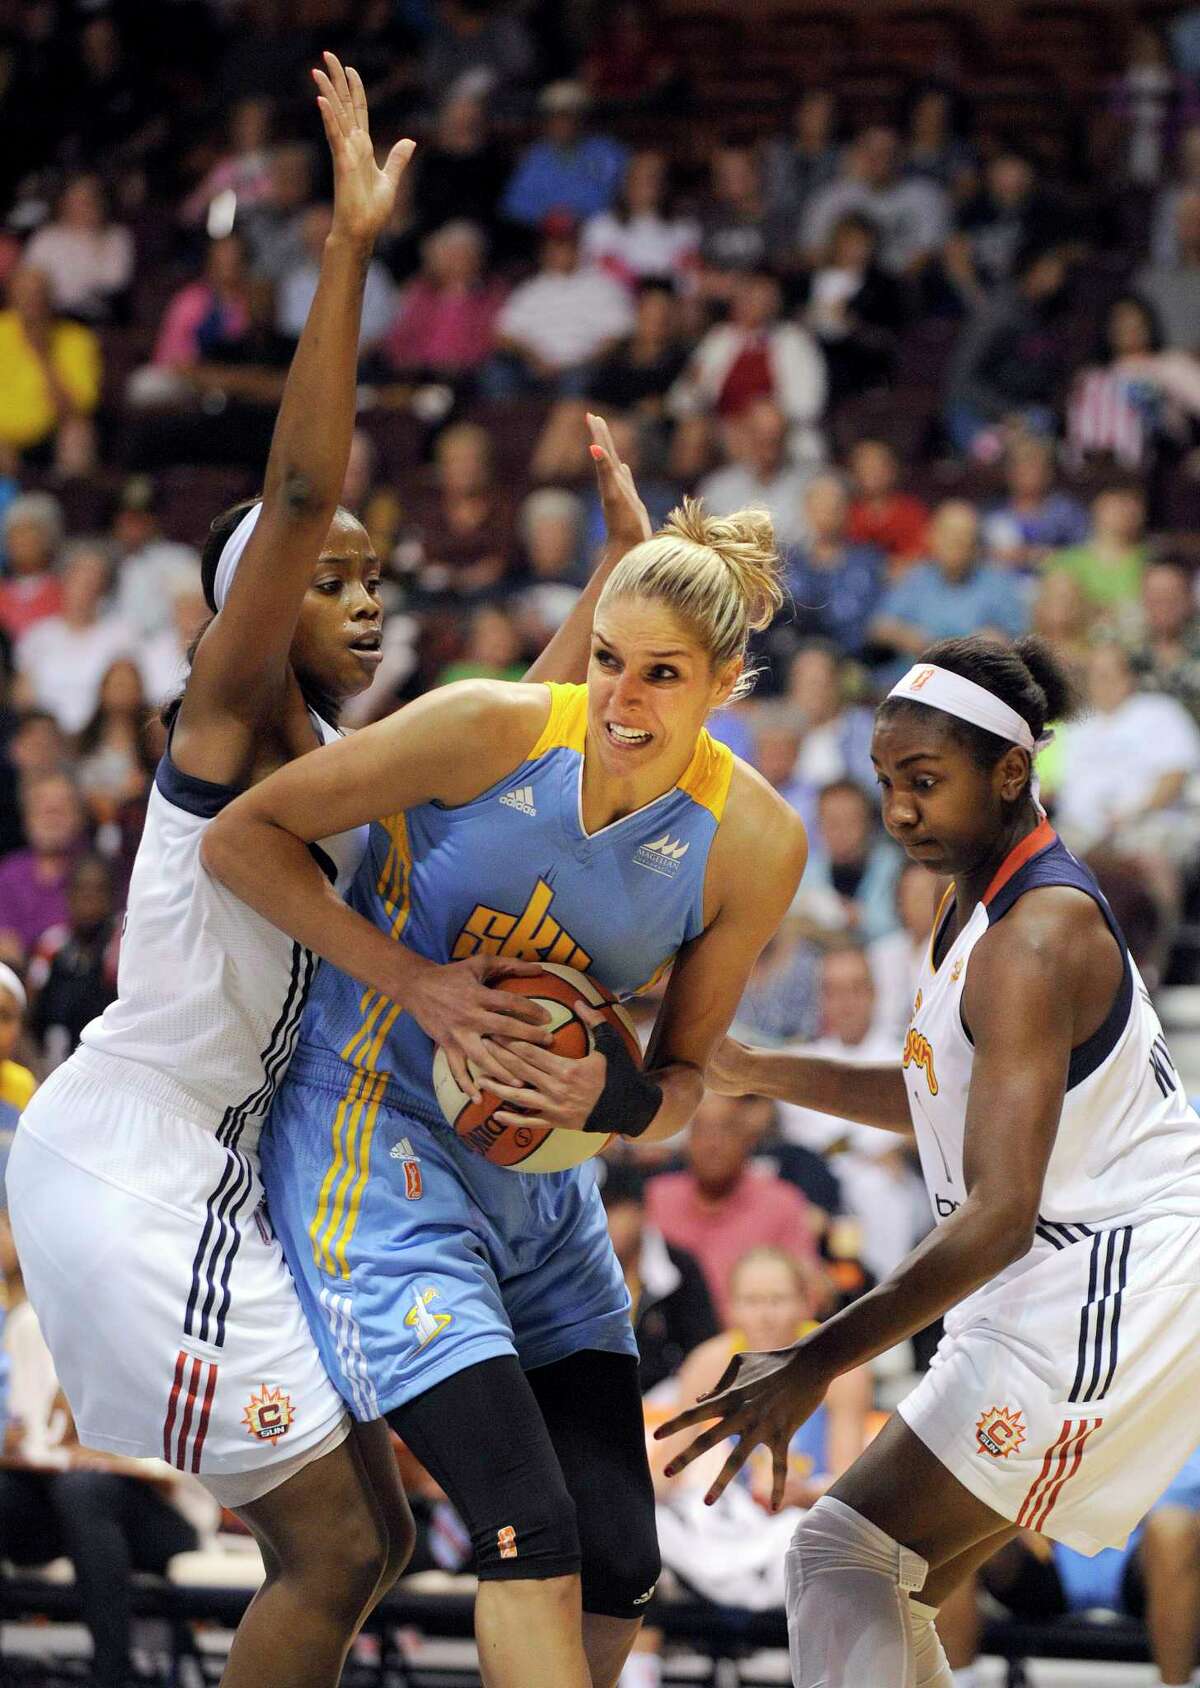 Chicago Sky's Elena Delle Donne , center, is guarded by Connecticut Sun's Camille Little, left, and Elizabeth Williams during the first half of a WNBA basketball game in Uncasville, Conn., on Thursday, July 2, 2015. (AP Photo/Fred Beckham)